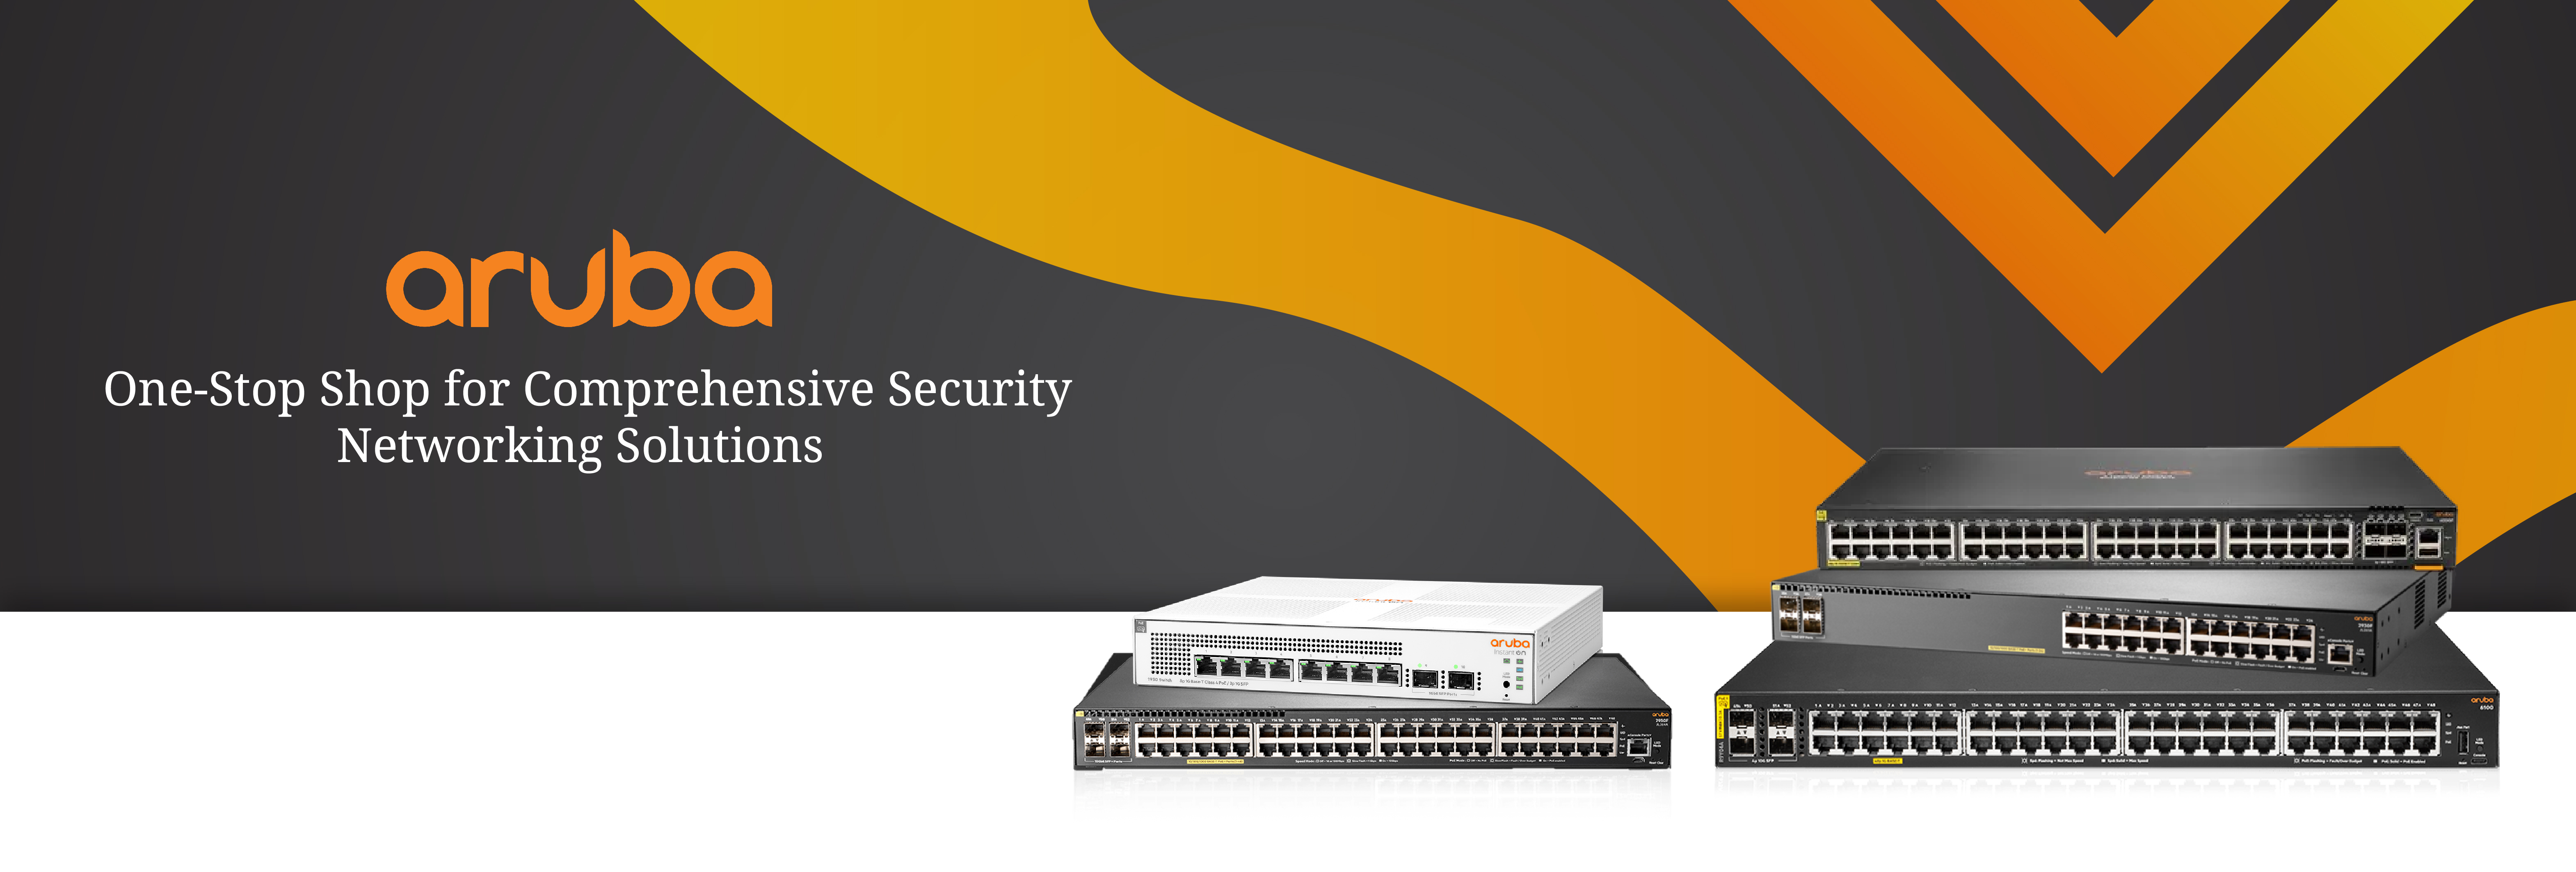 Infome technologies:One-Stop Shop for Comprehensive Security Networking Solutions